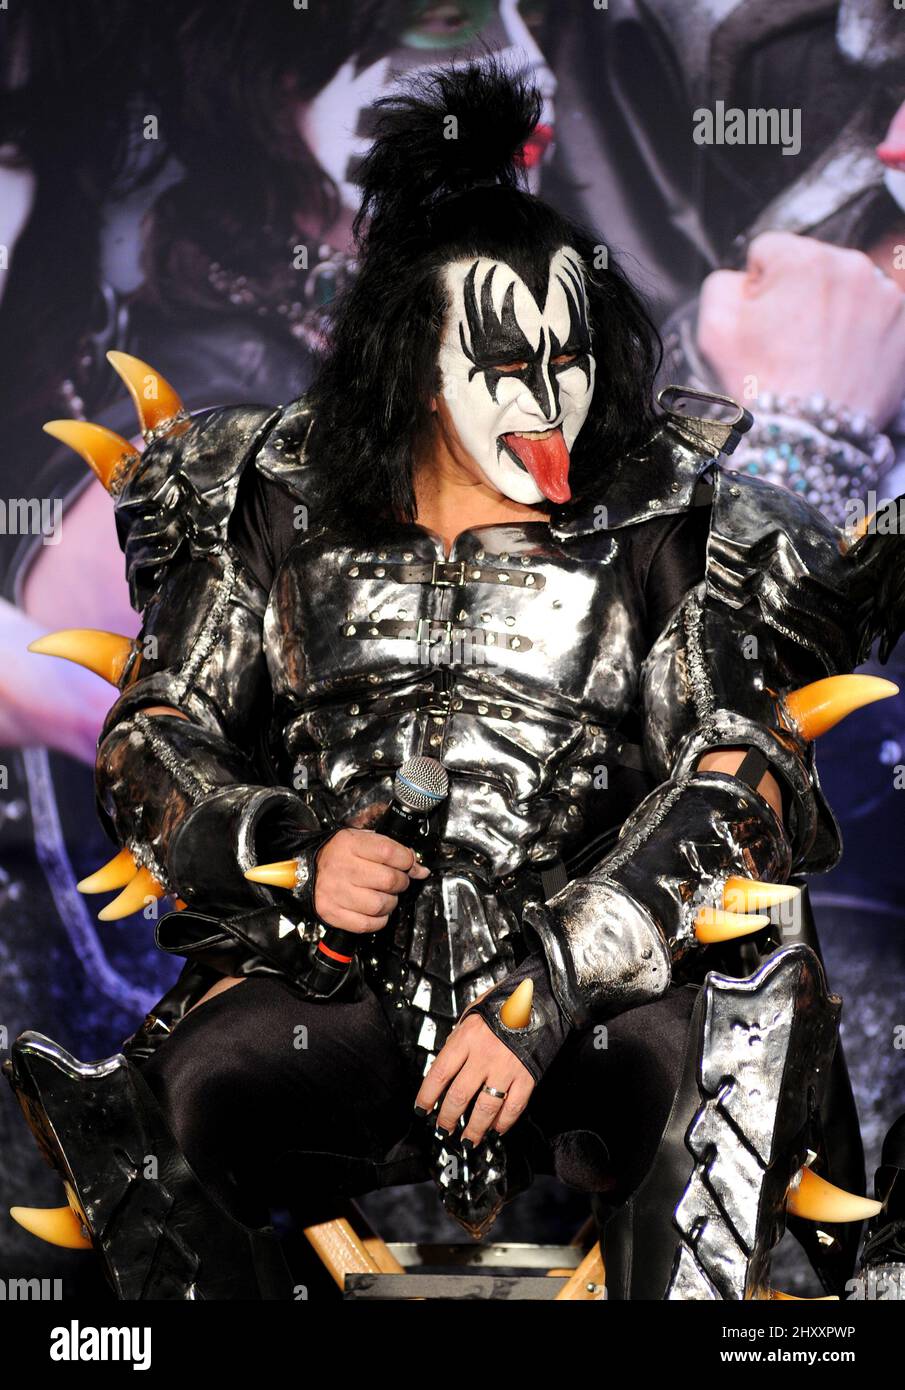 Gene Simmons, of KISS announces 'The Tour' at the Roosevelt Hotel in Hollywood, California Stock Photo